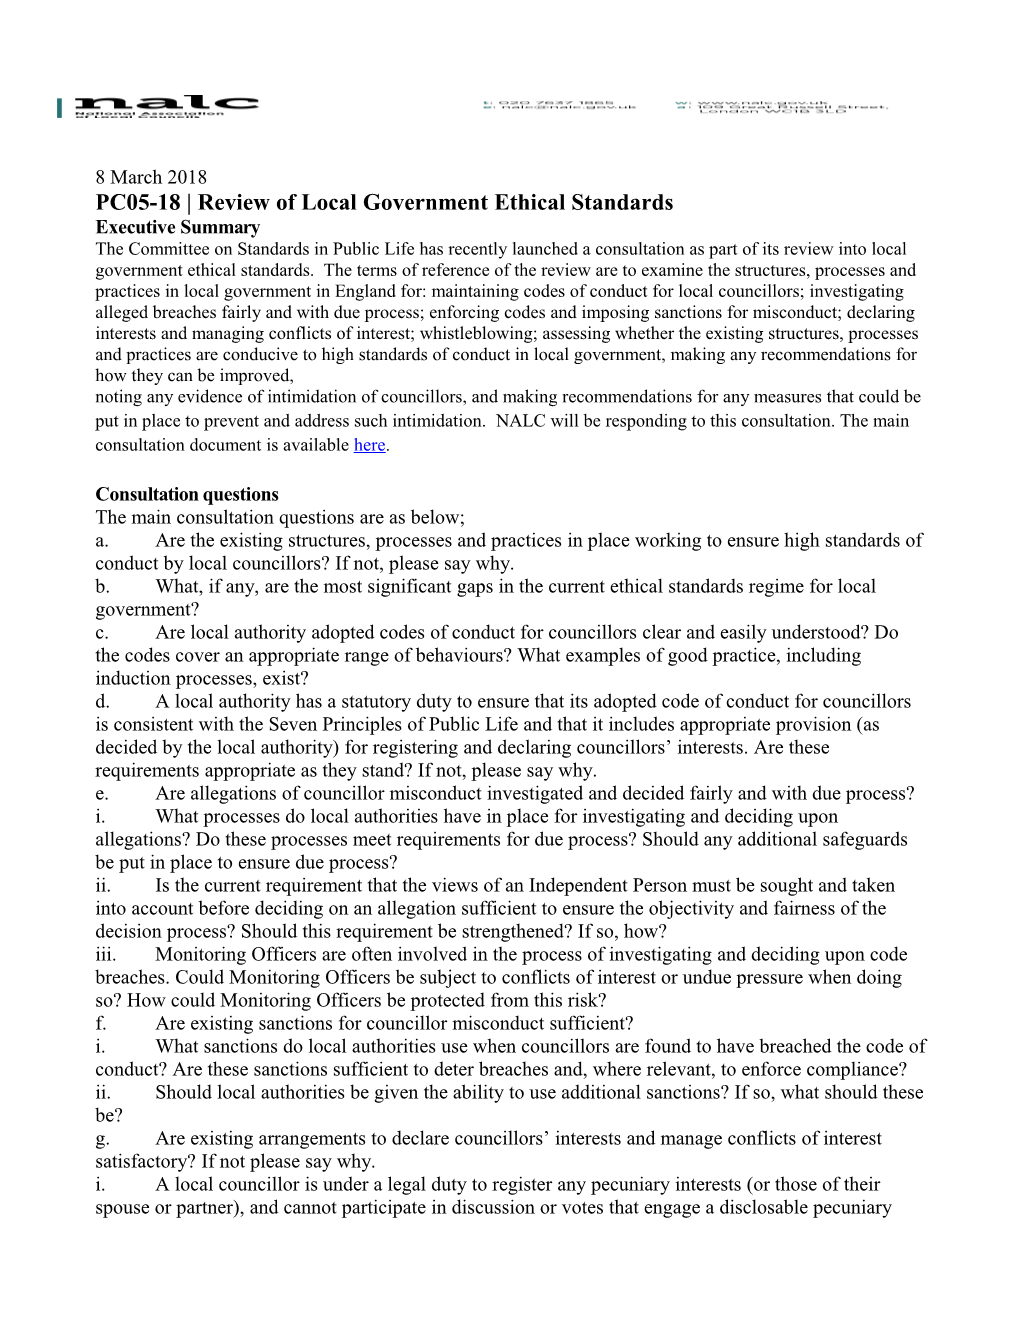 PC05-18 Review of Local Government Ethical Standards